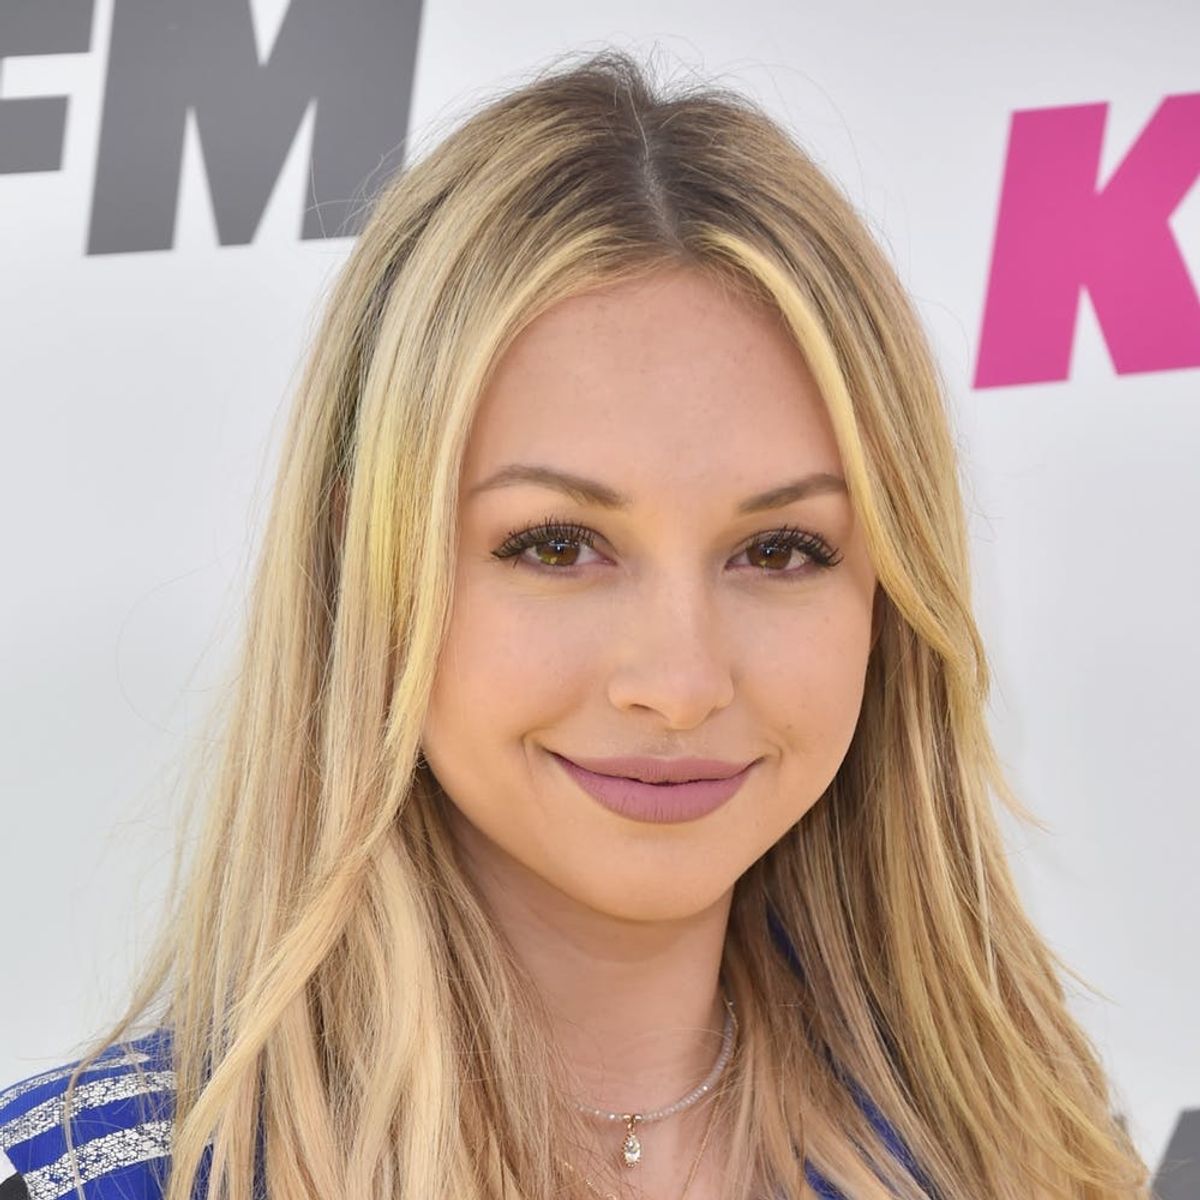 Corinne Olympios’ Boyfriend Is Weighing in on the BIP Controversy